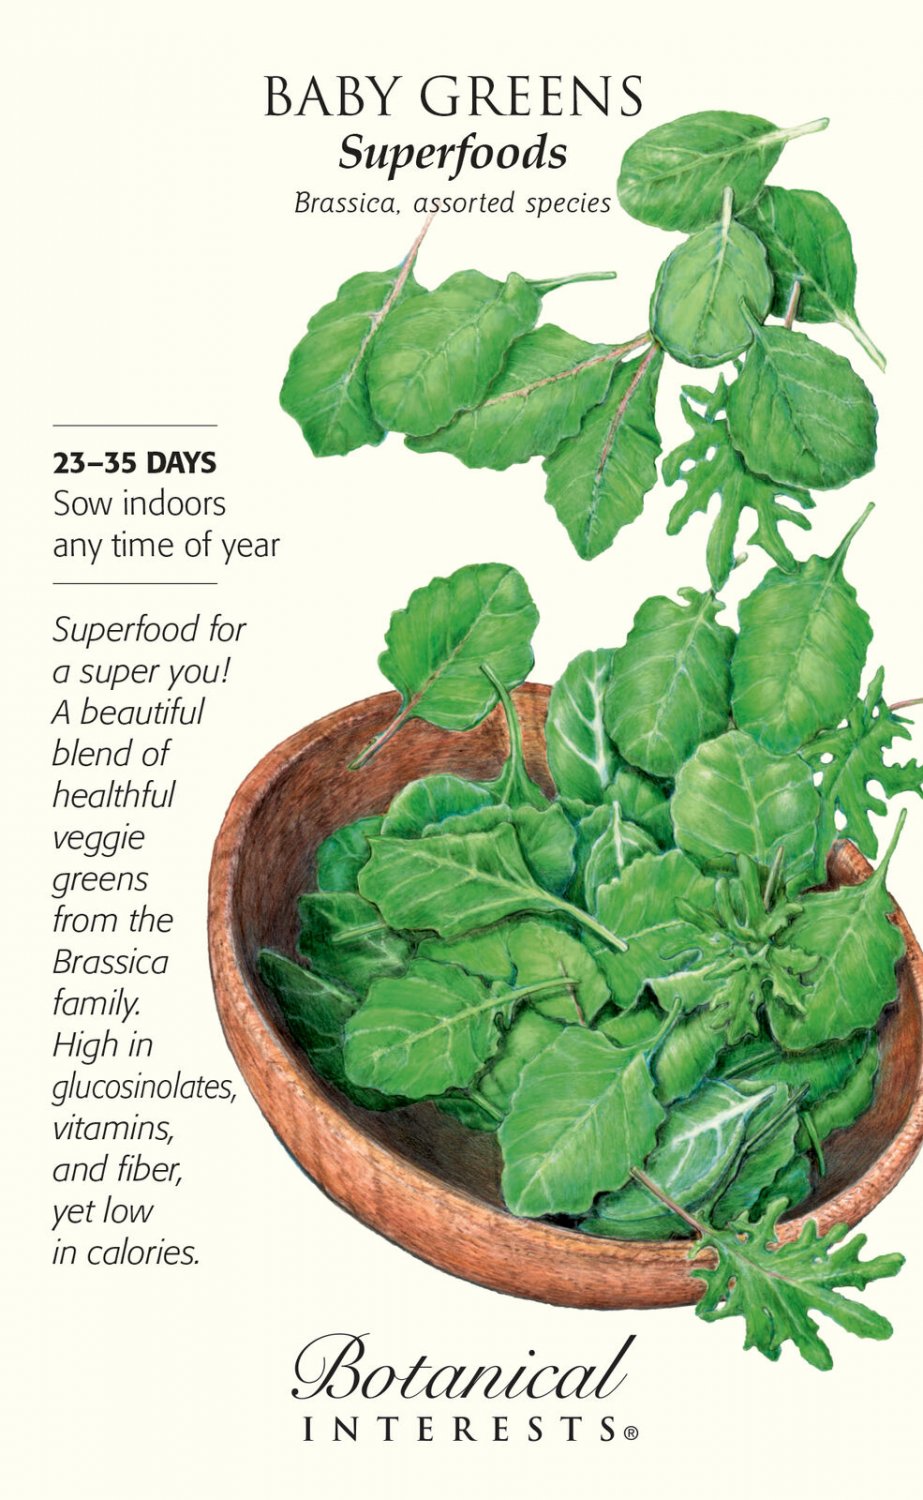 Superfoods Baby Greens Seeds - 12 grams - Brassica